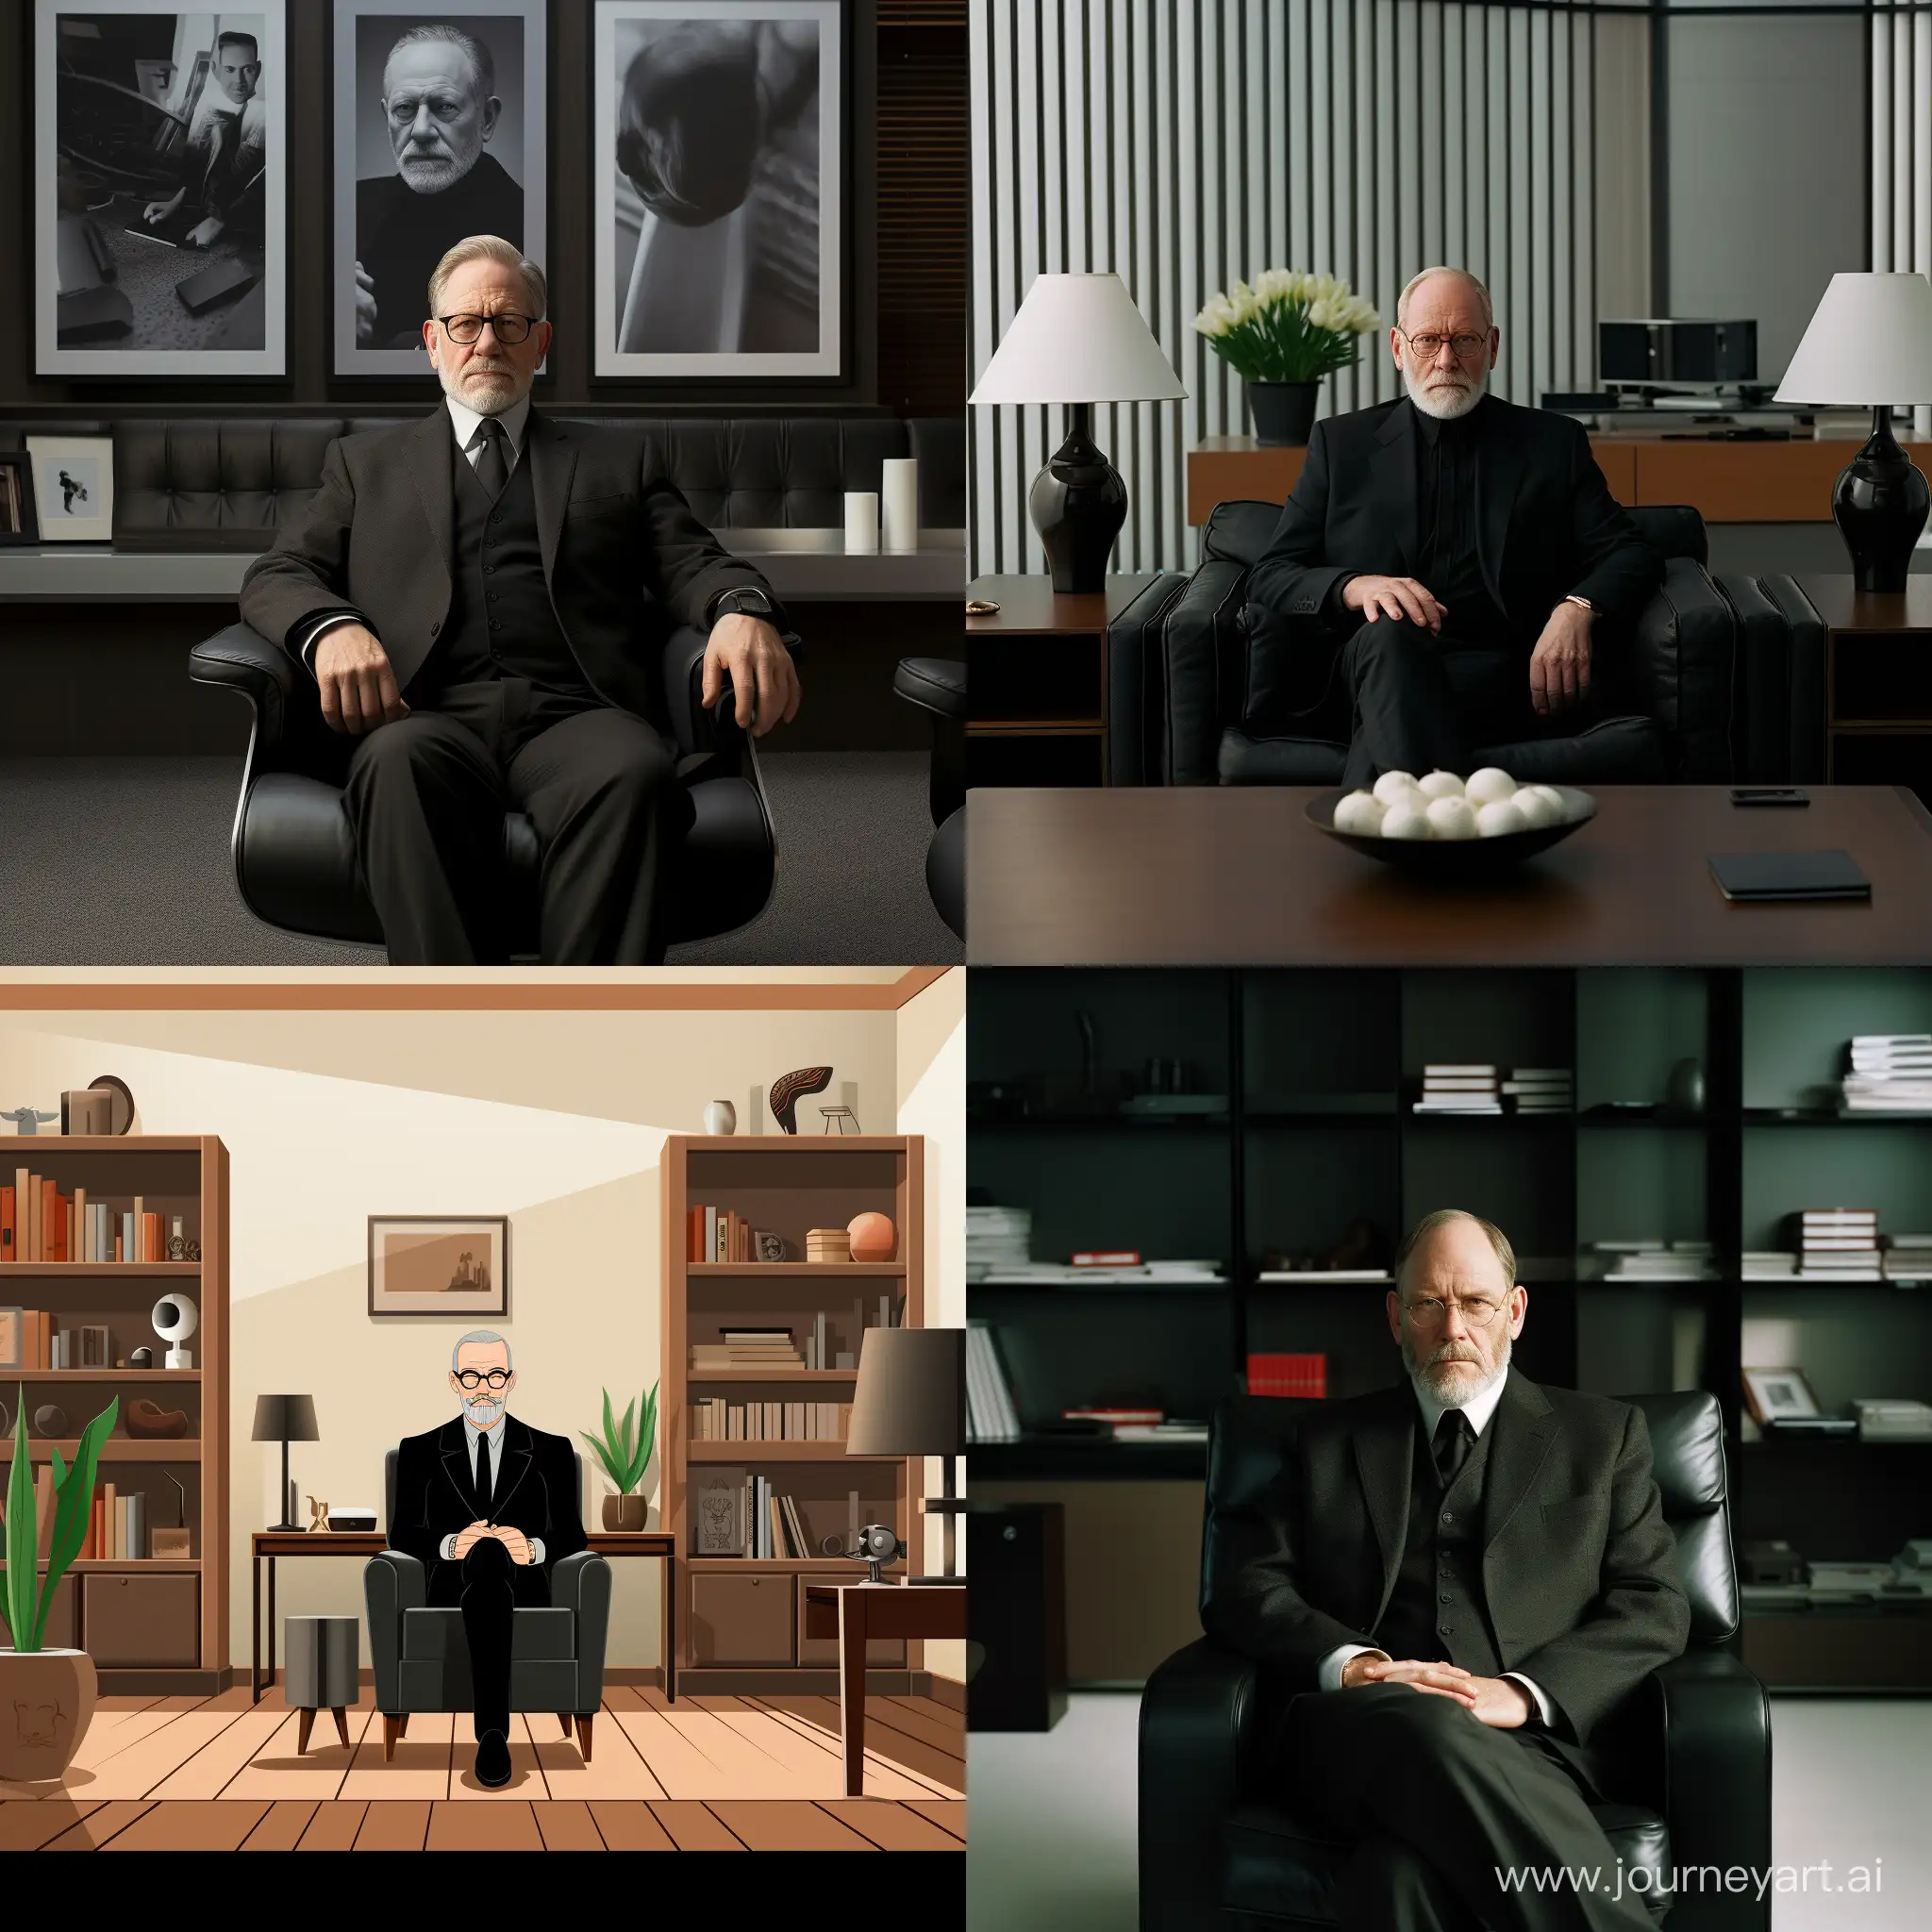 Middleaged-Psychology-Professor-in-Cinematic-Office-Setting